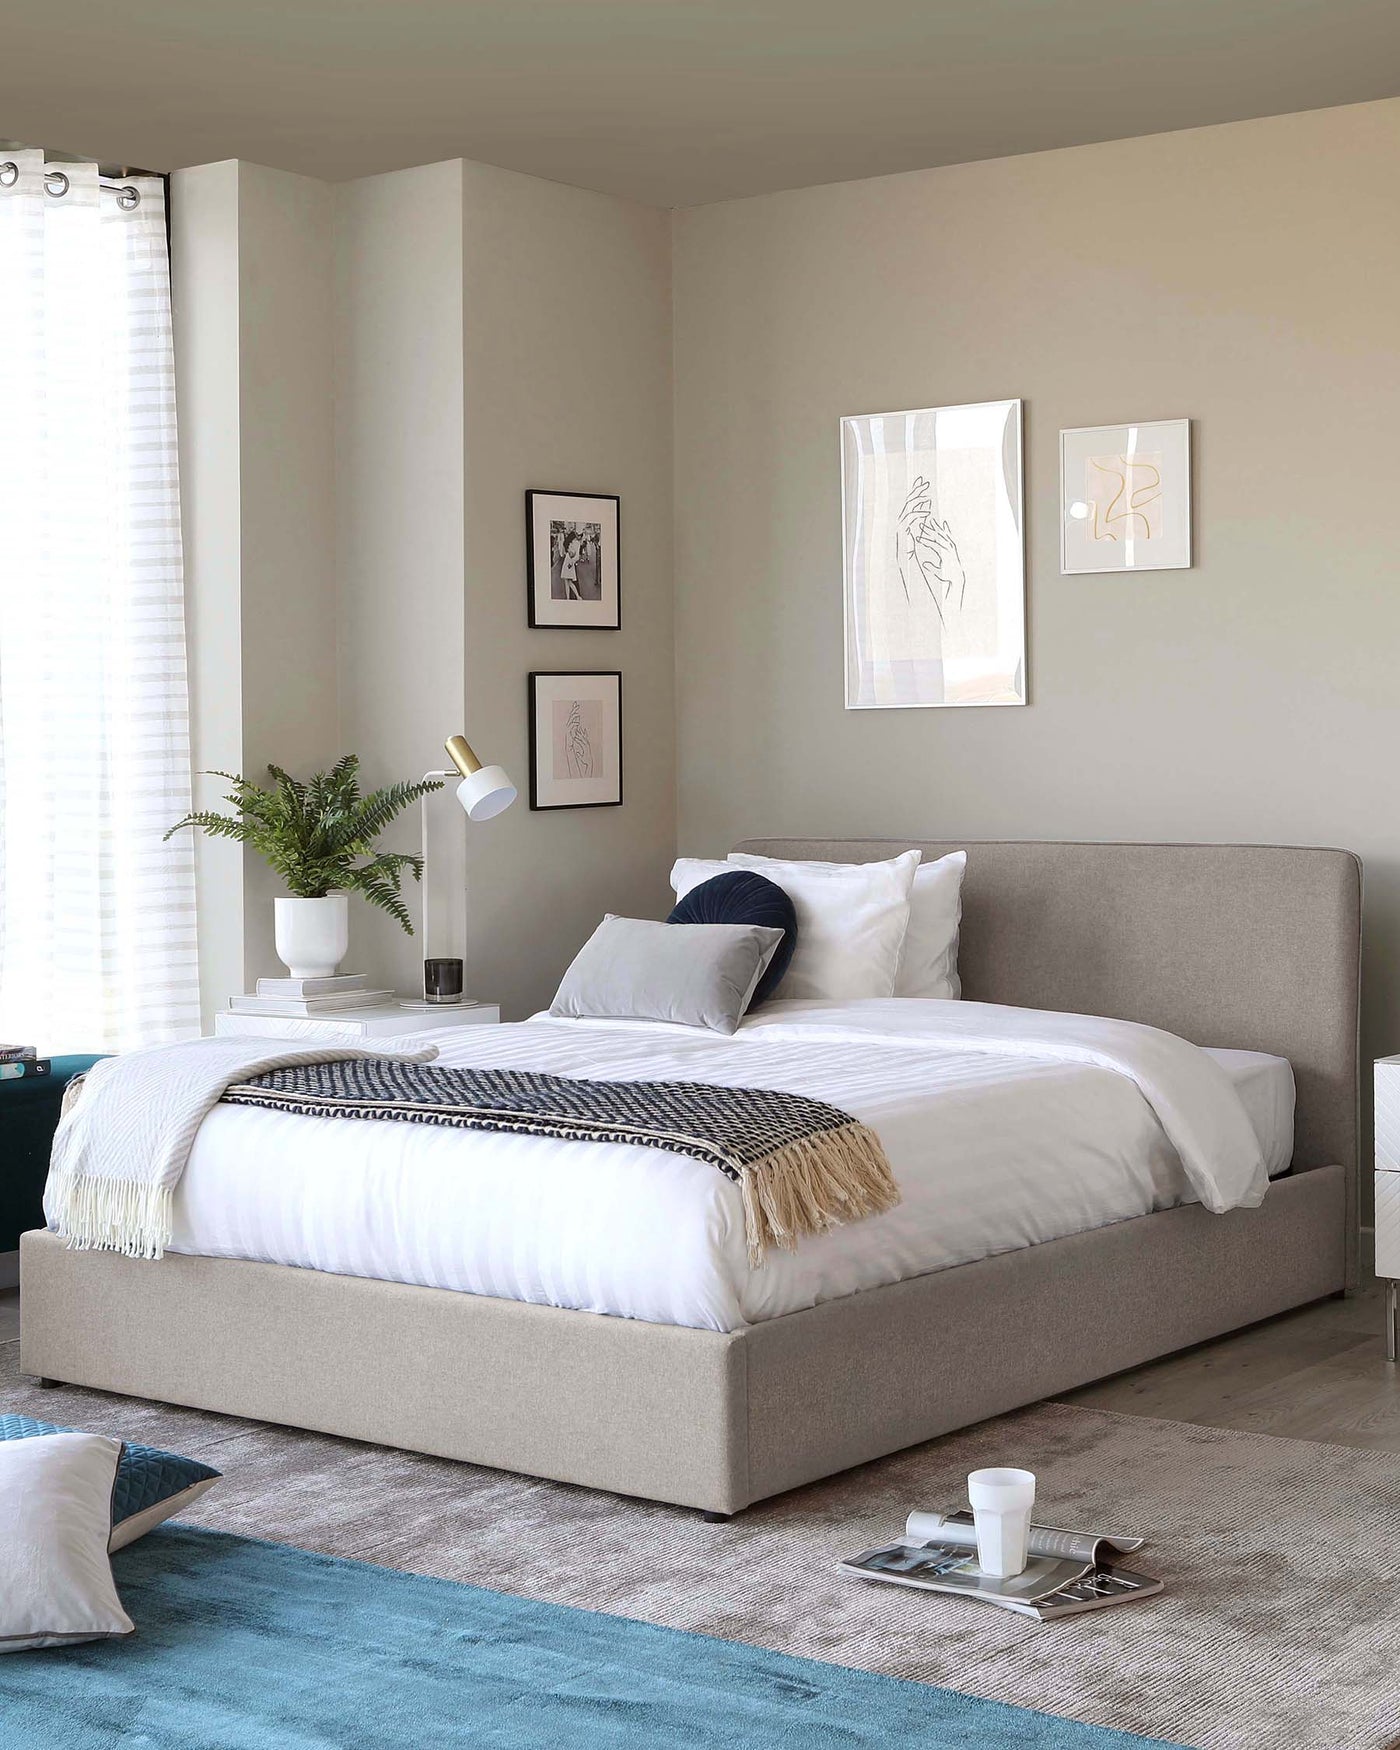 A modern bedroom featuring a large, upholstered king-size platform bed in a light grey fabric with a simple headboard. The bed is dressed with crisp white linens, navy blue pillows, and a patterned throw with tassel fringe detailing. Beside the bed is a white nightstand with a sleek design, holding a small potted plant and a white table lamp with a gold accent. The room is completed with a textured grey area rug partially beneath the bed, introducing a cosy element to the space.